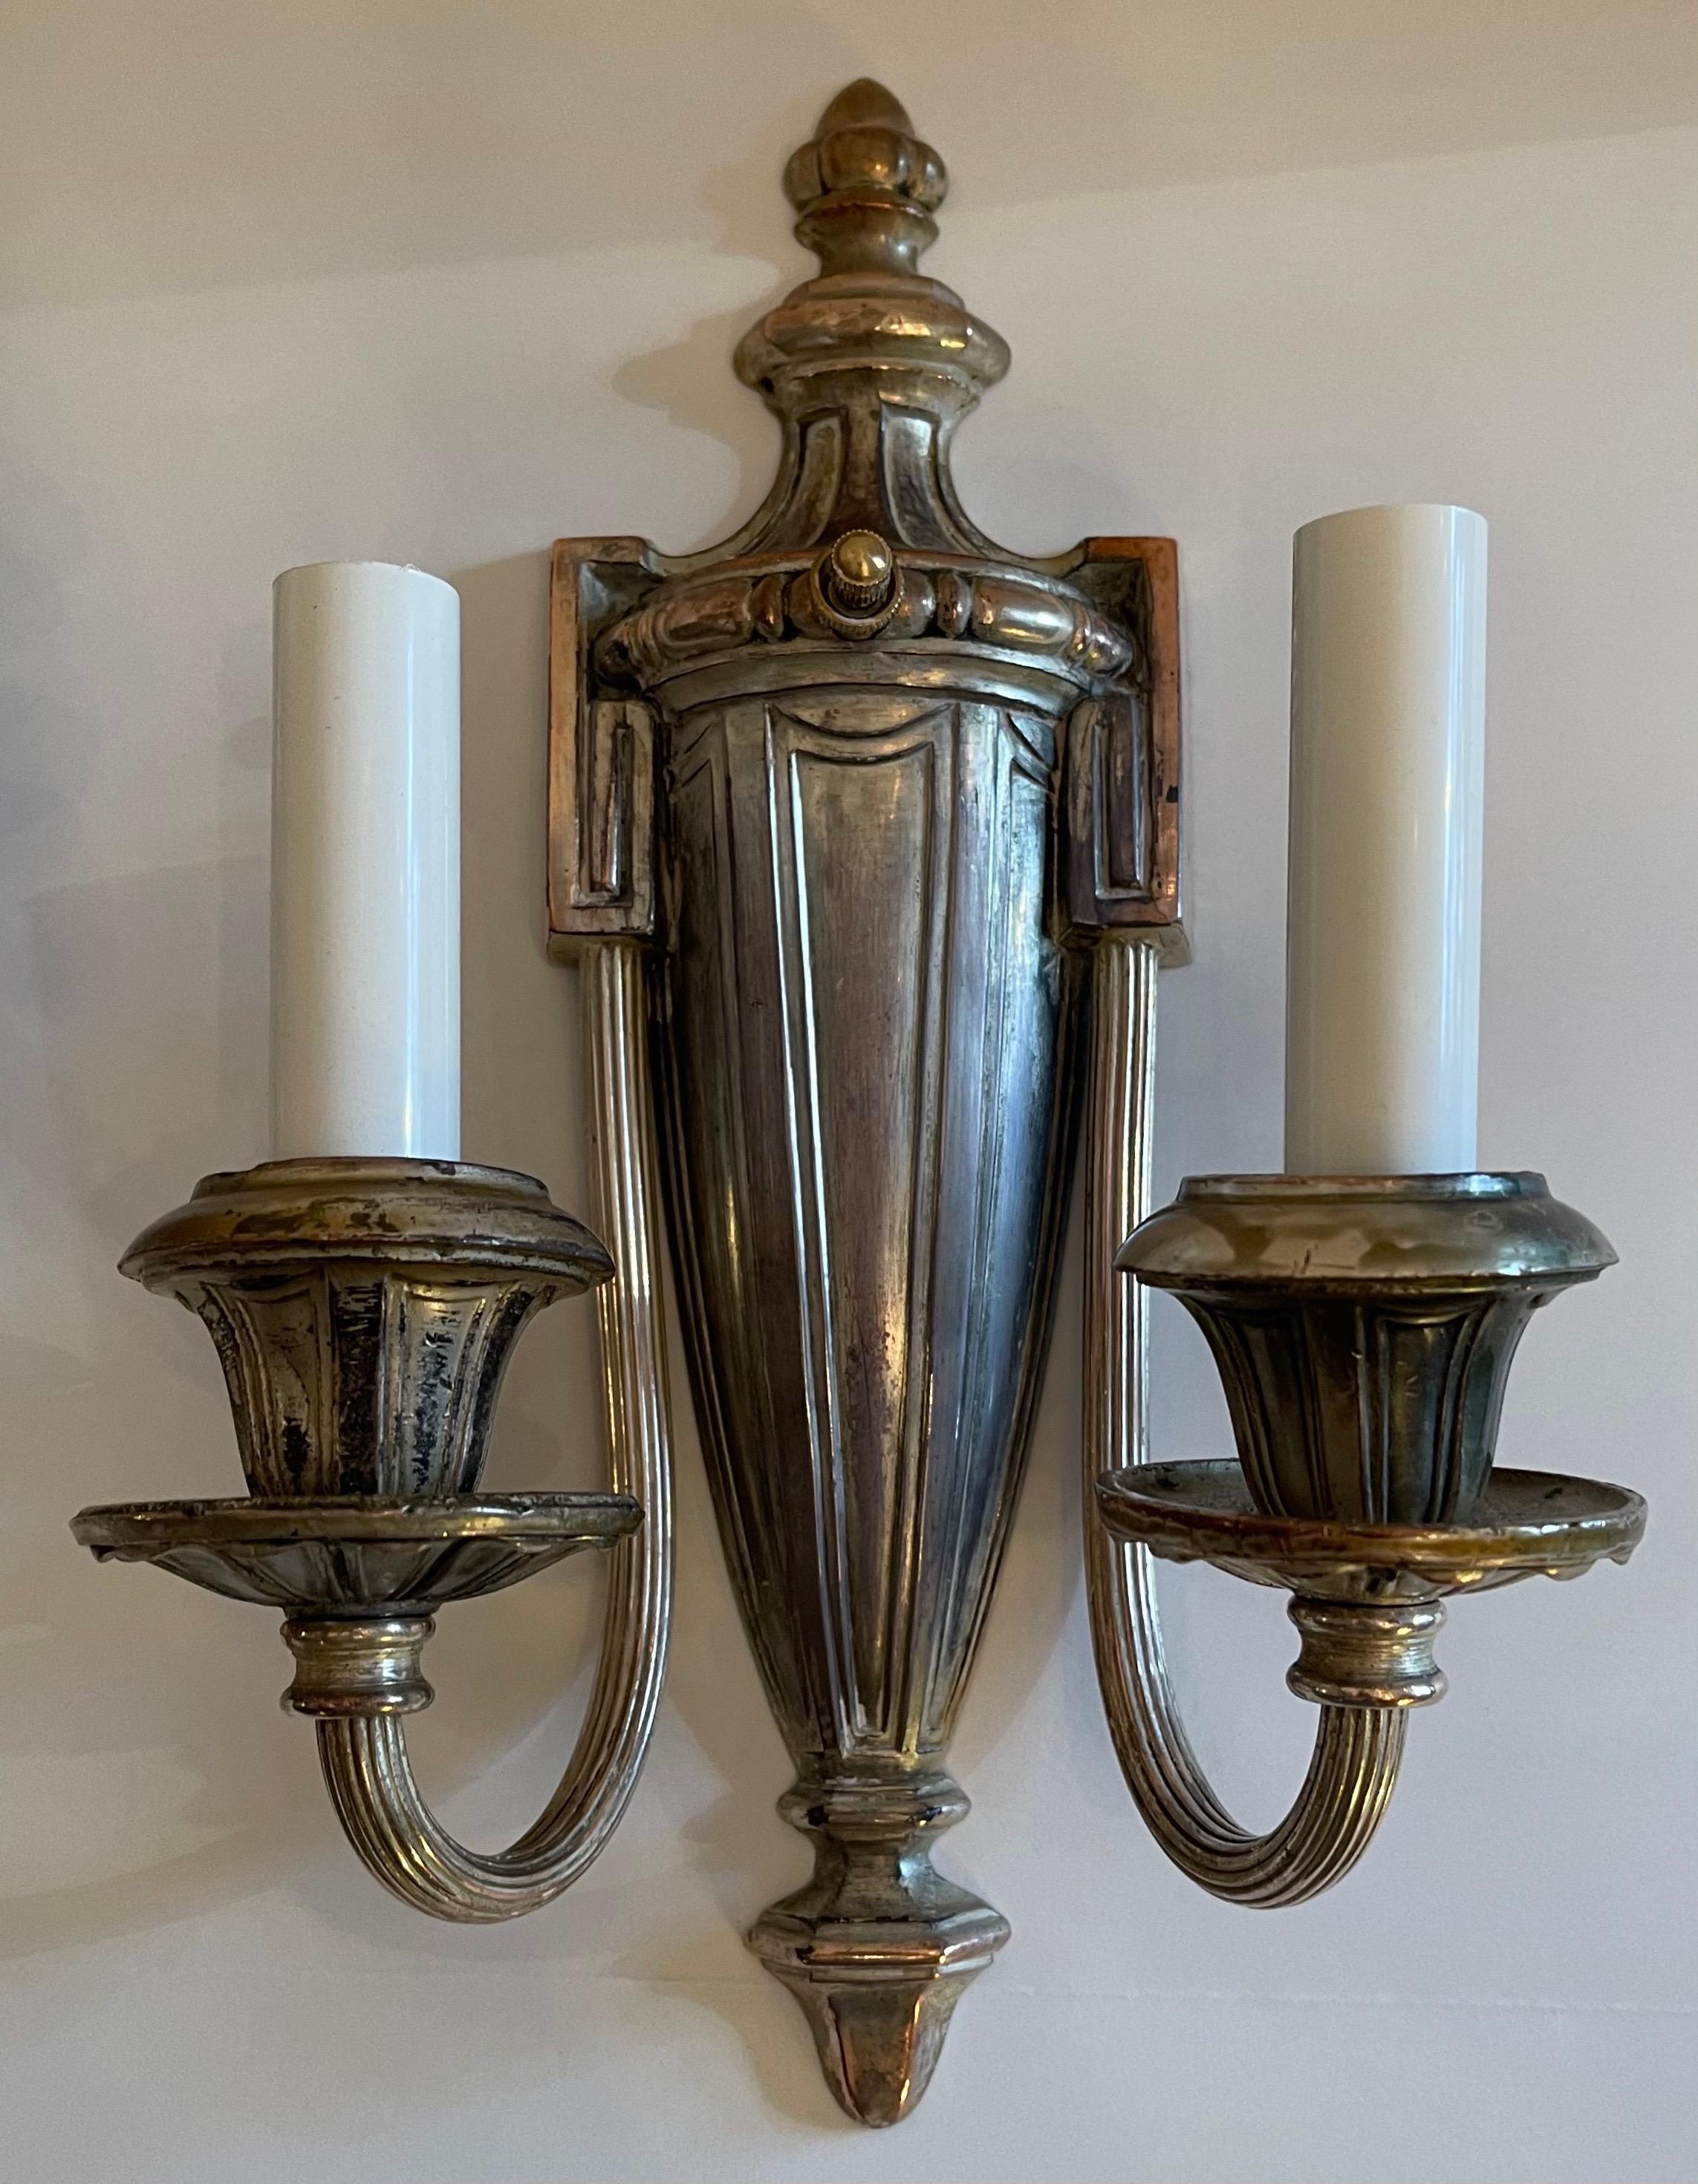 A handsome pair of Caldwell style silvered bronze Adams / Regency urn style two-light sconces rewired.